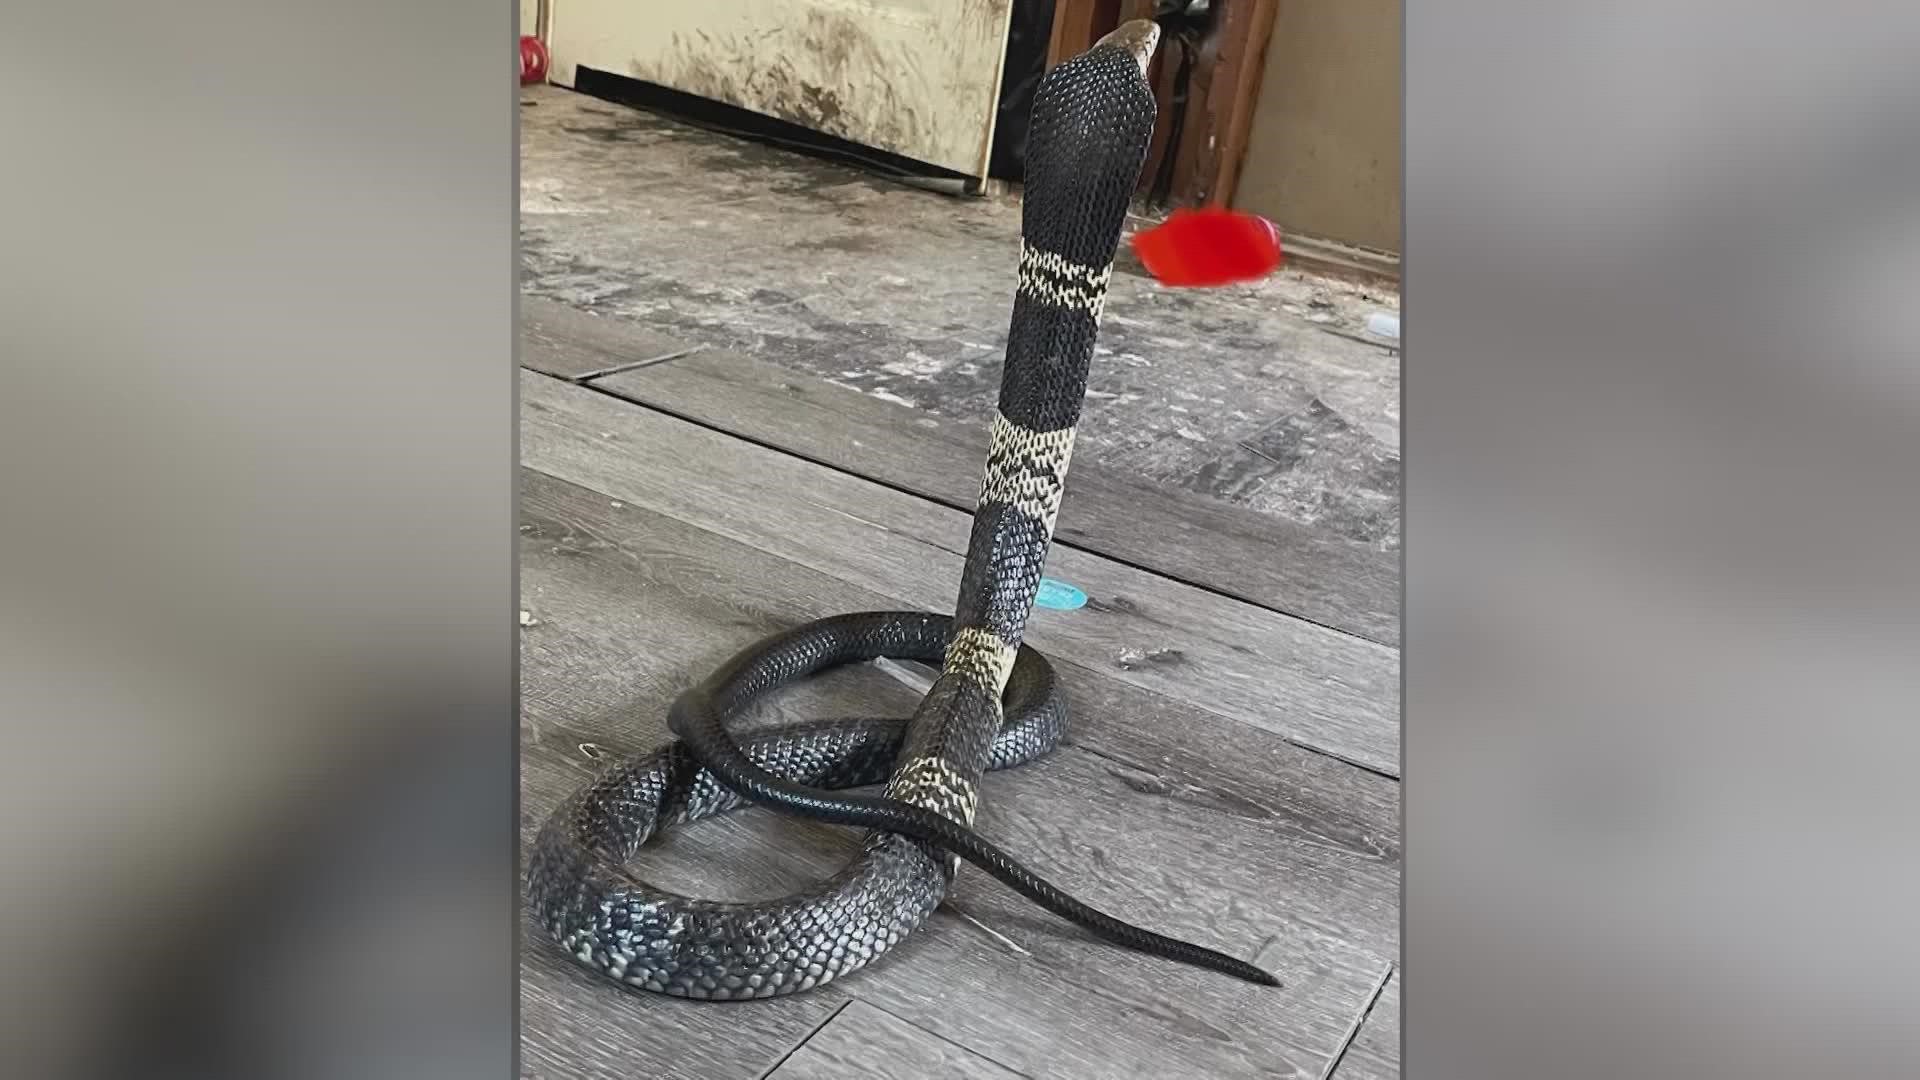 Experts say it's "highly unlikely" that the so-called "Grand Prairie Cobra" is still alive. But that doesn't mean it can't still haunt your dreams.